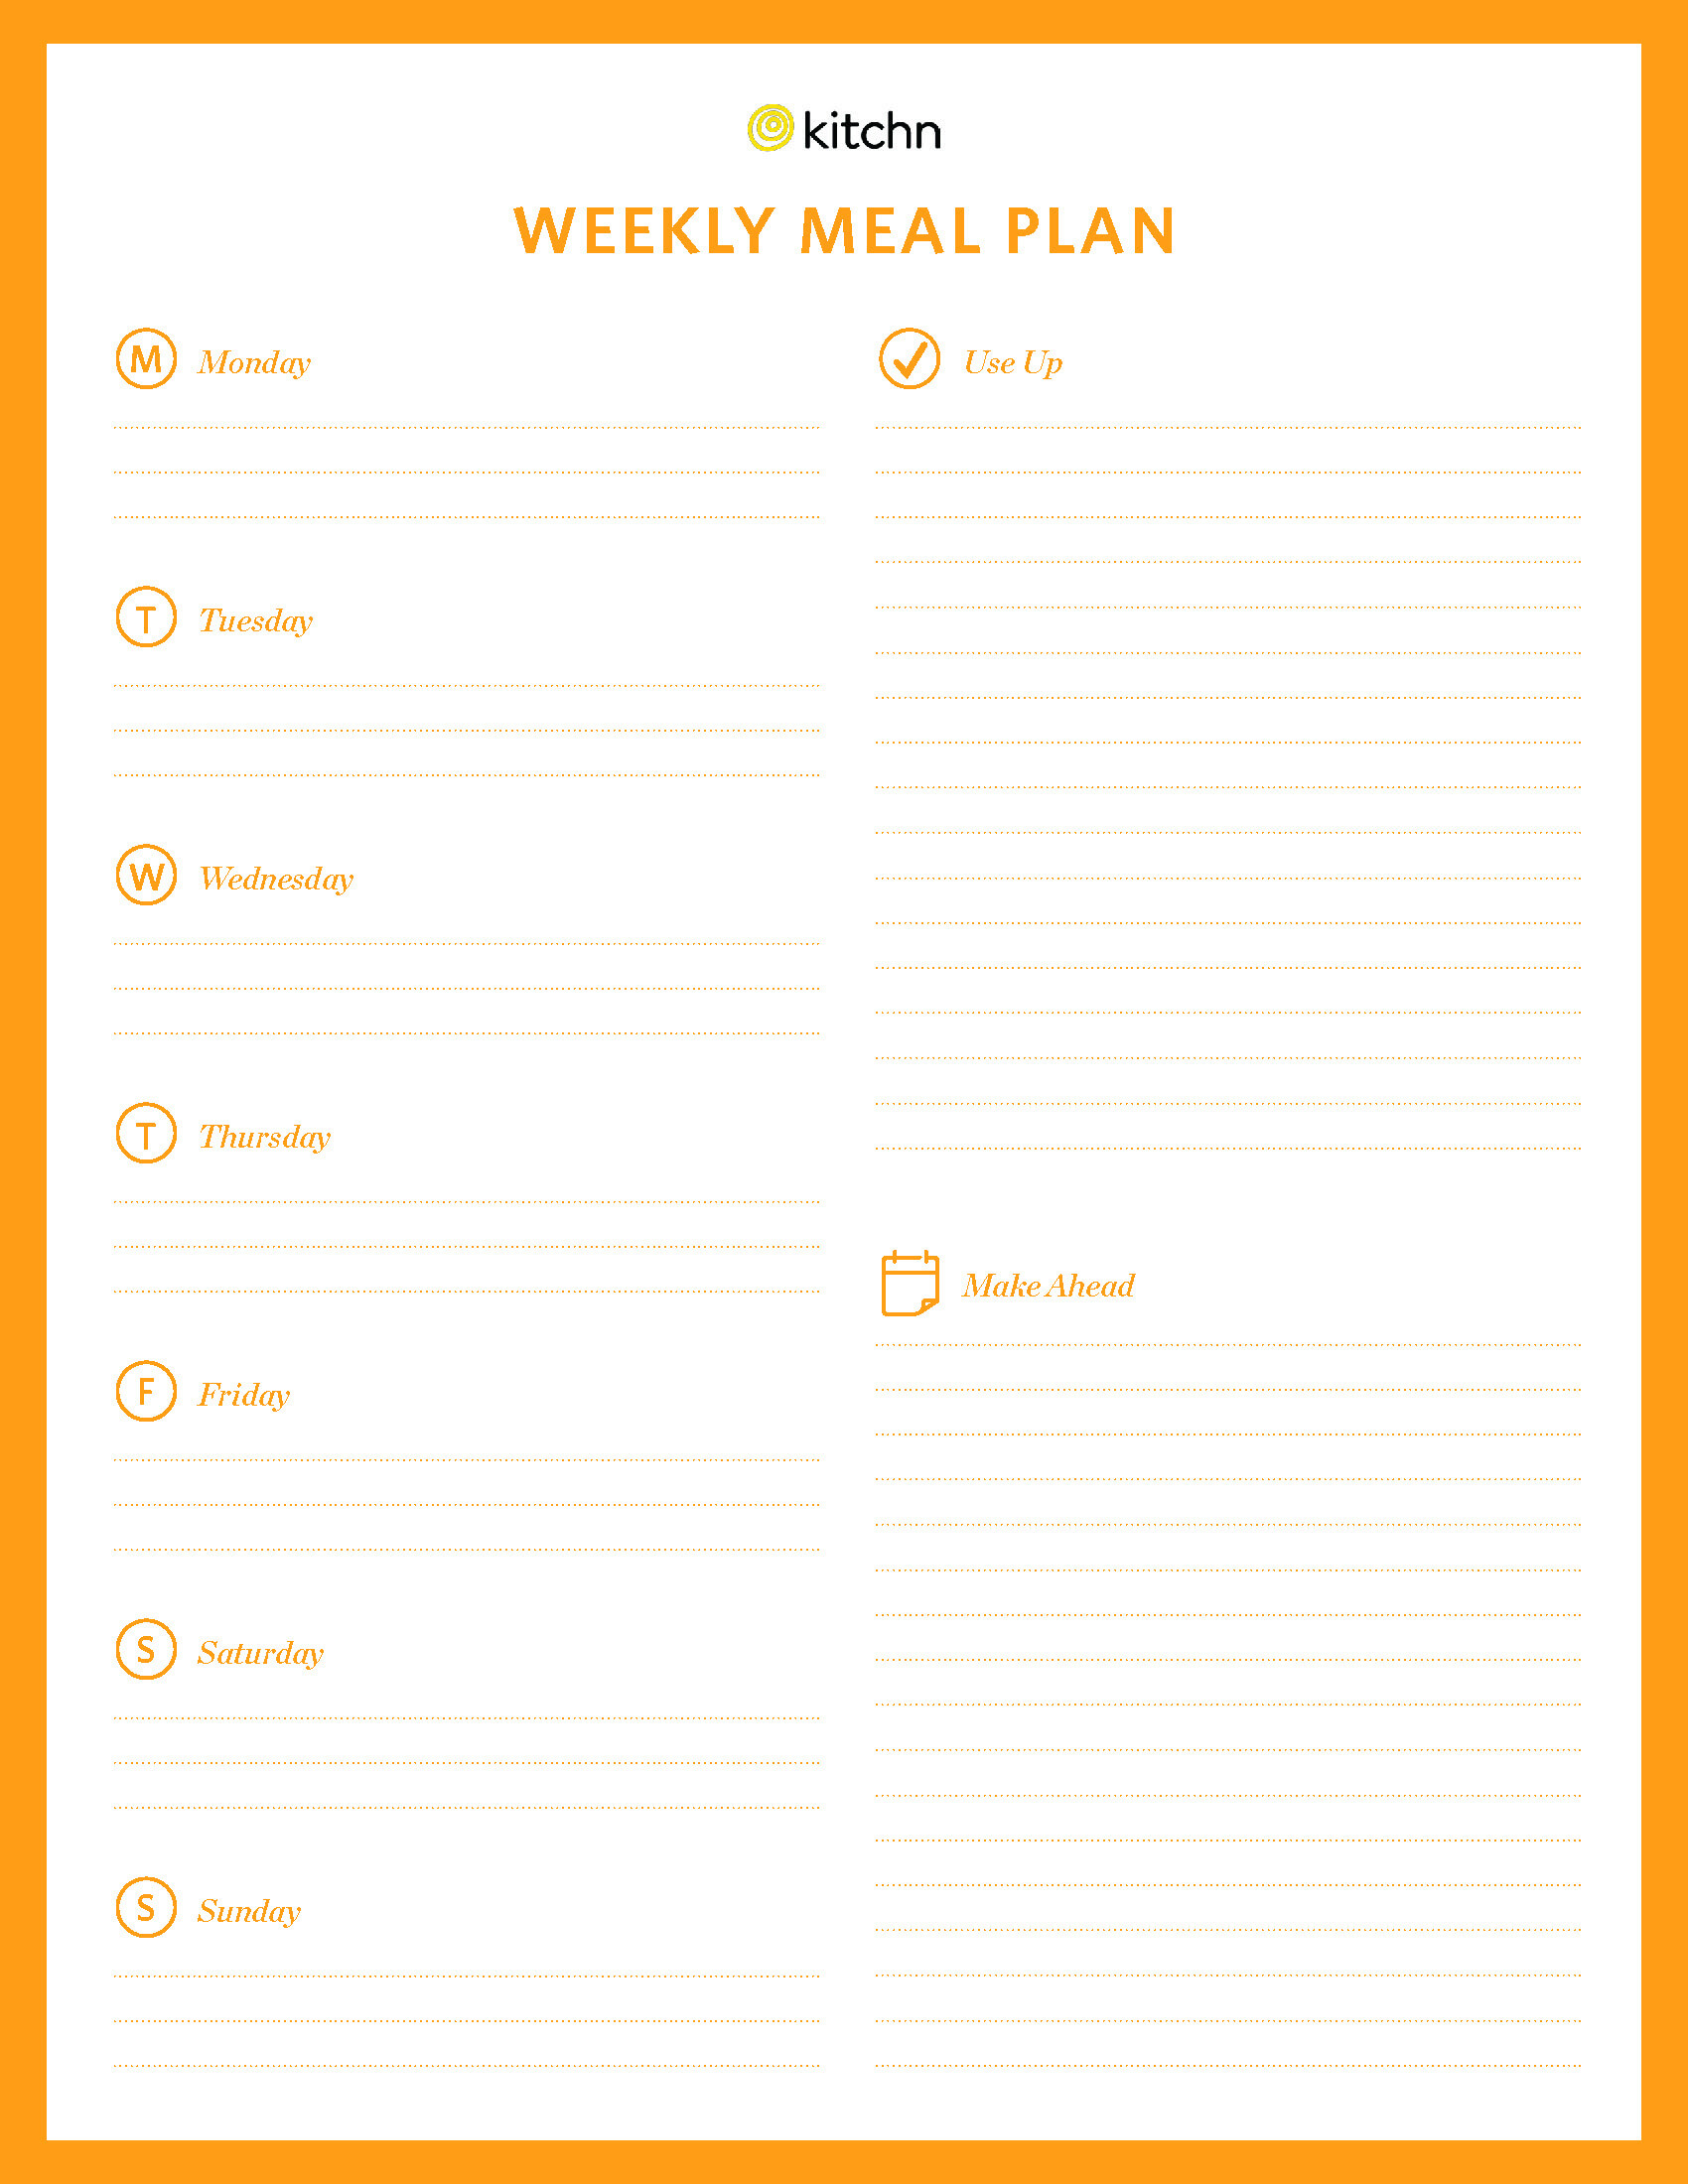 Kitchn's Meal Plan Template | Kitchn Throughout Blank Meal Plan Template